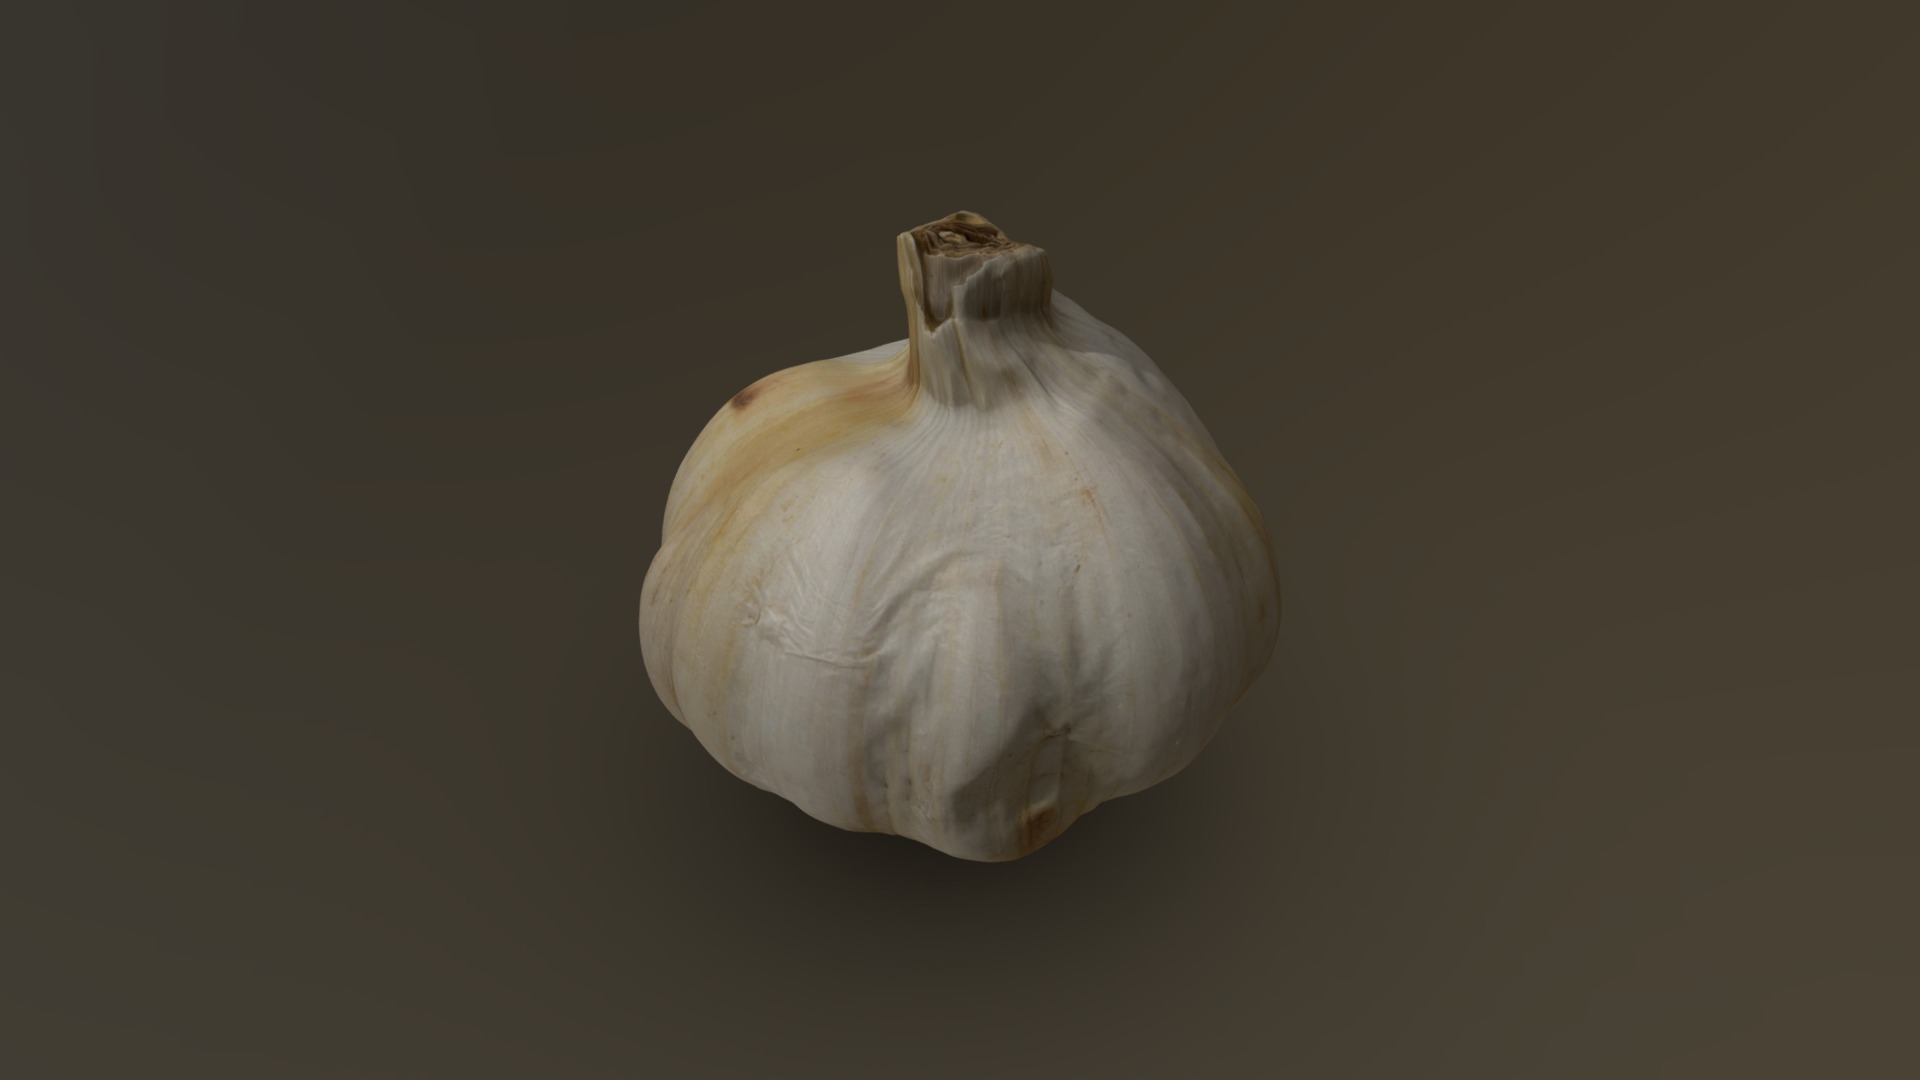 3D model Dried Garlic Head 12 - This is a 3D model of the Dried Garlic Head 12. The 3D model is about a white garlic on a black background.